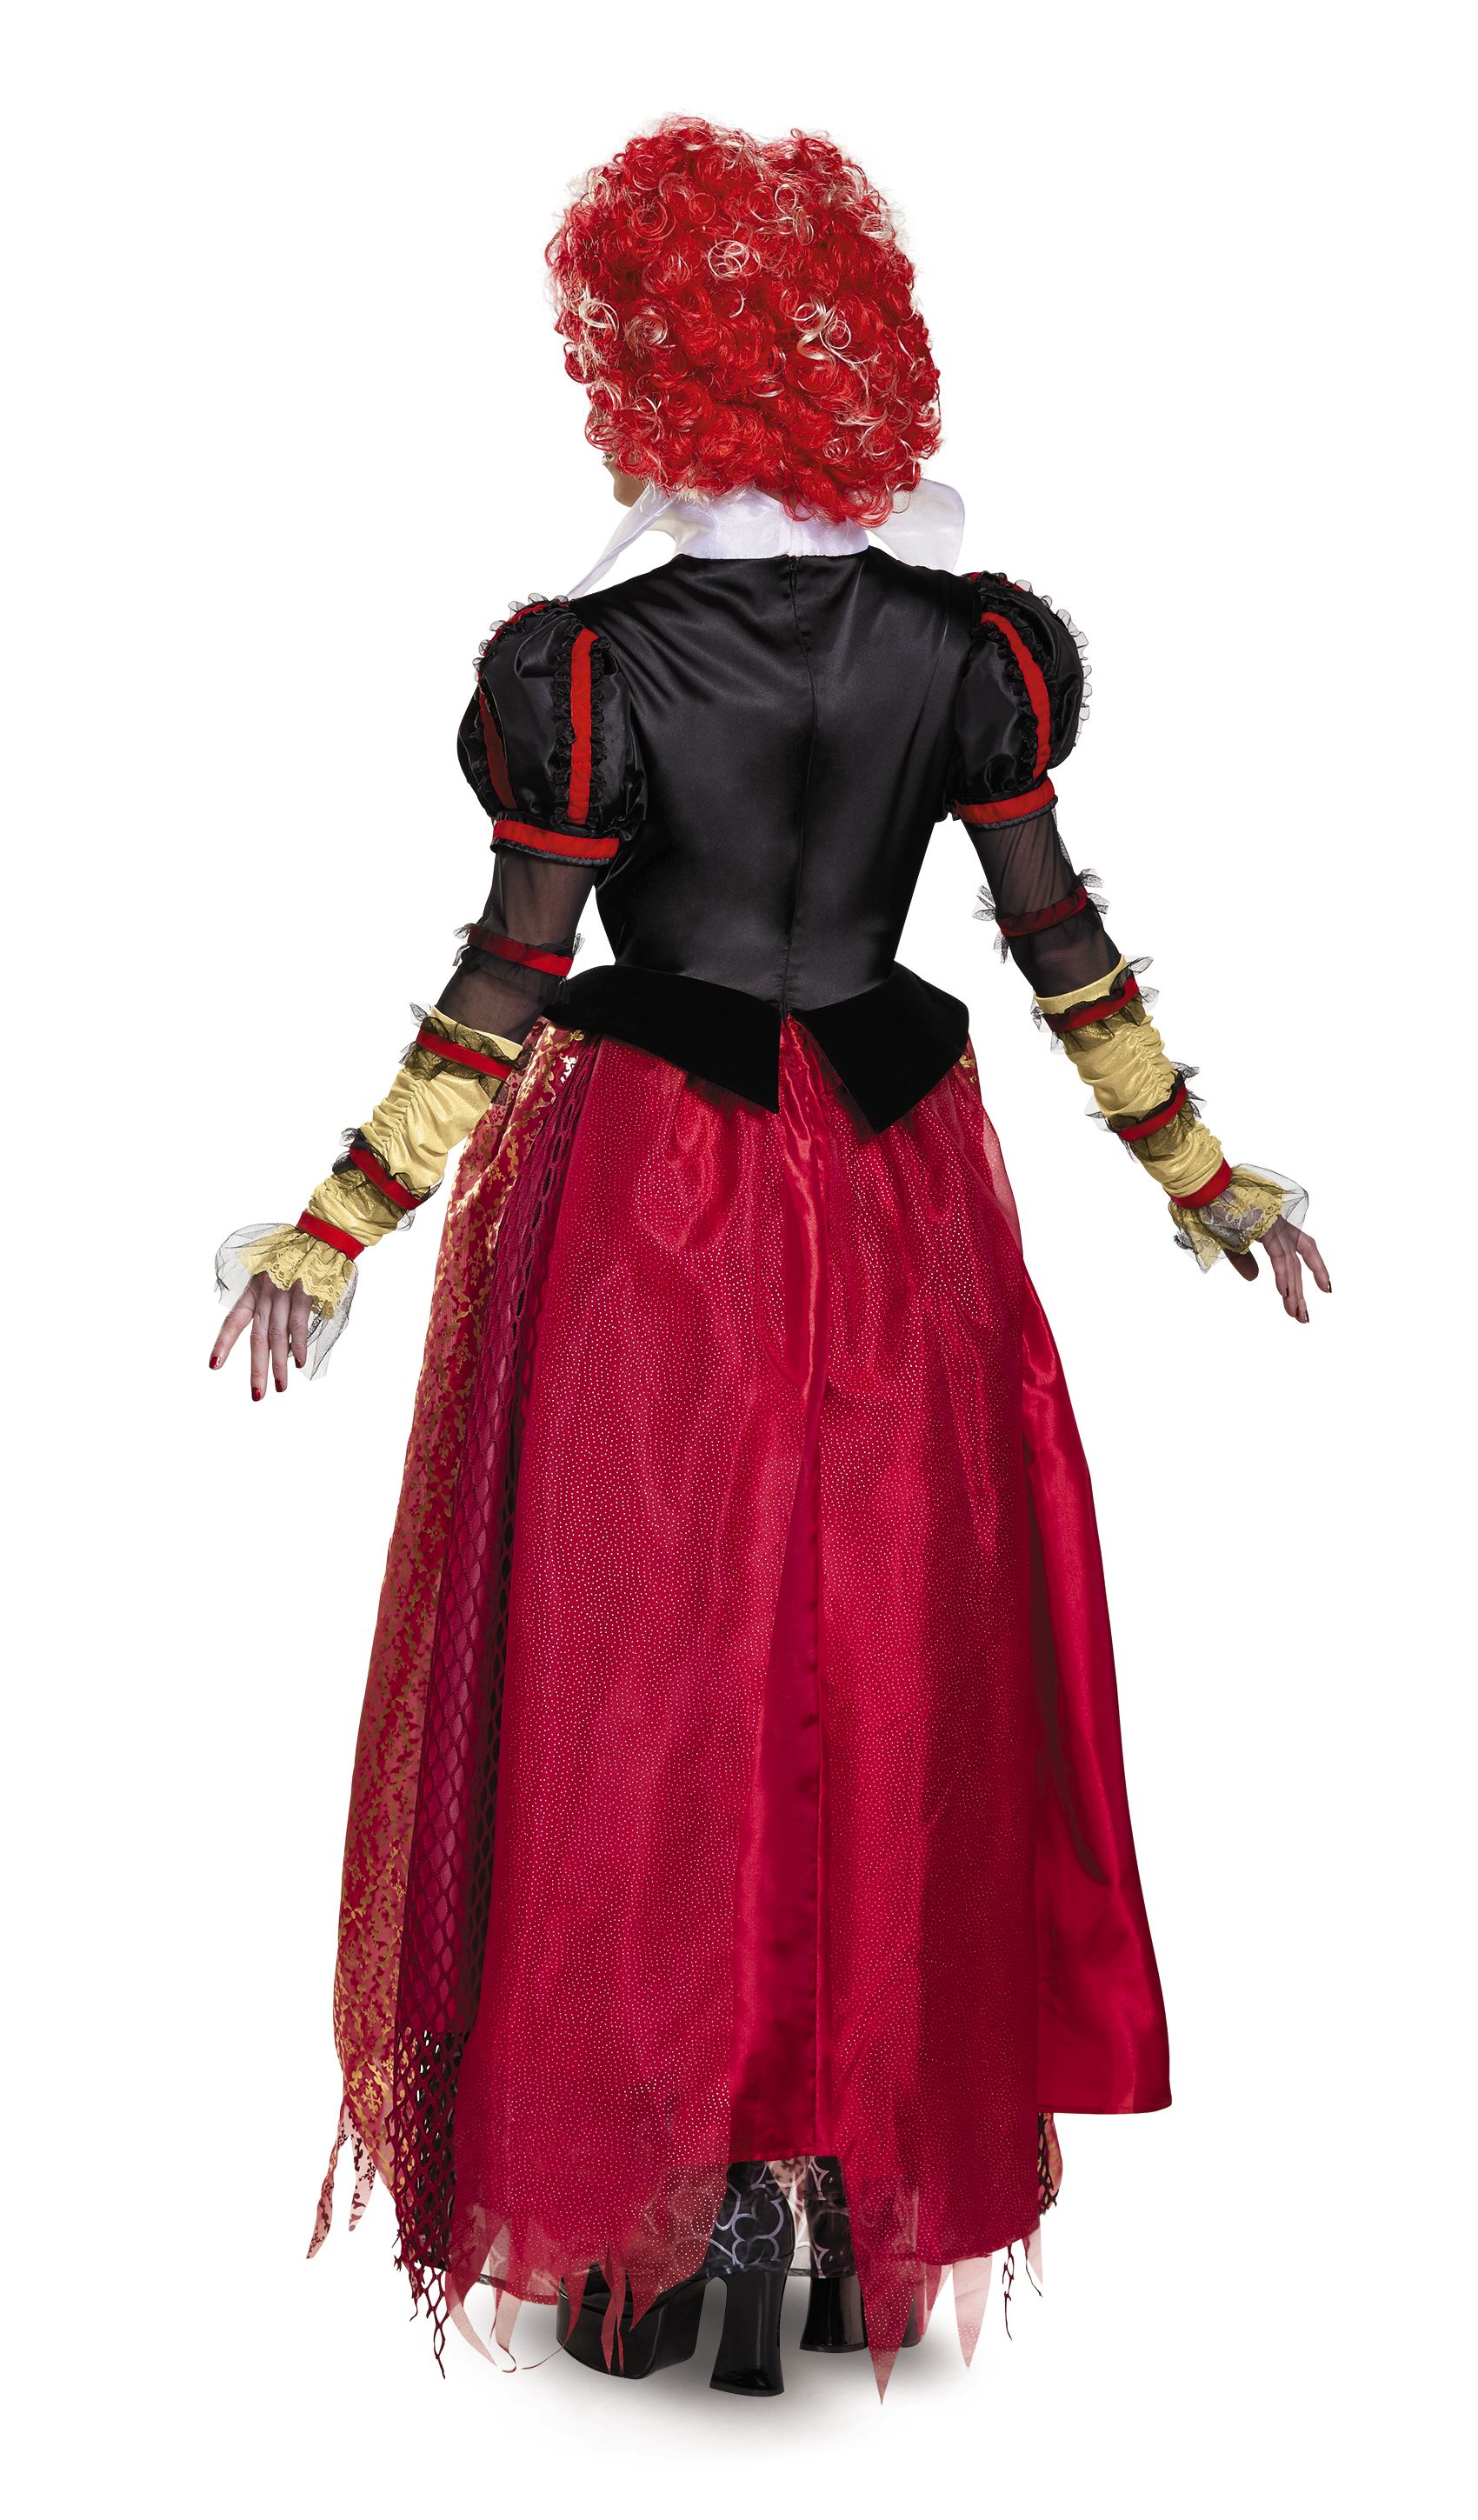 Adult Red Queen Woman Costume | $124.99 | The Costume Land